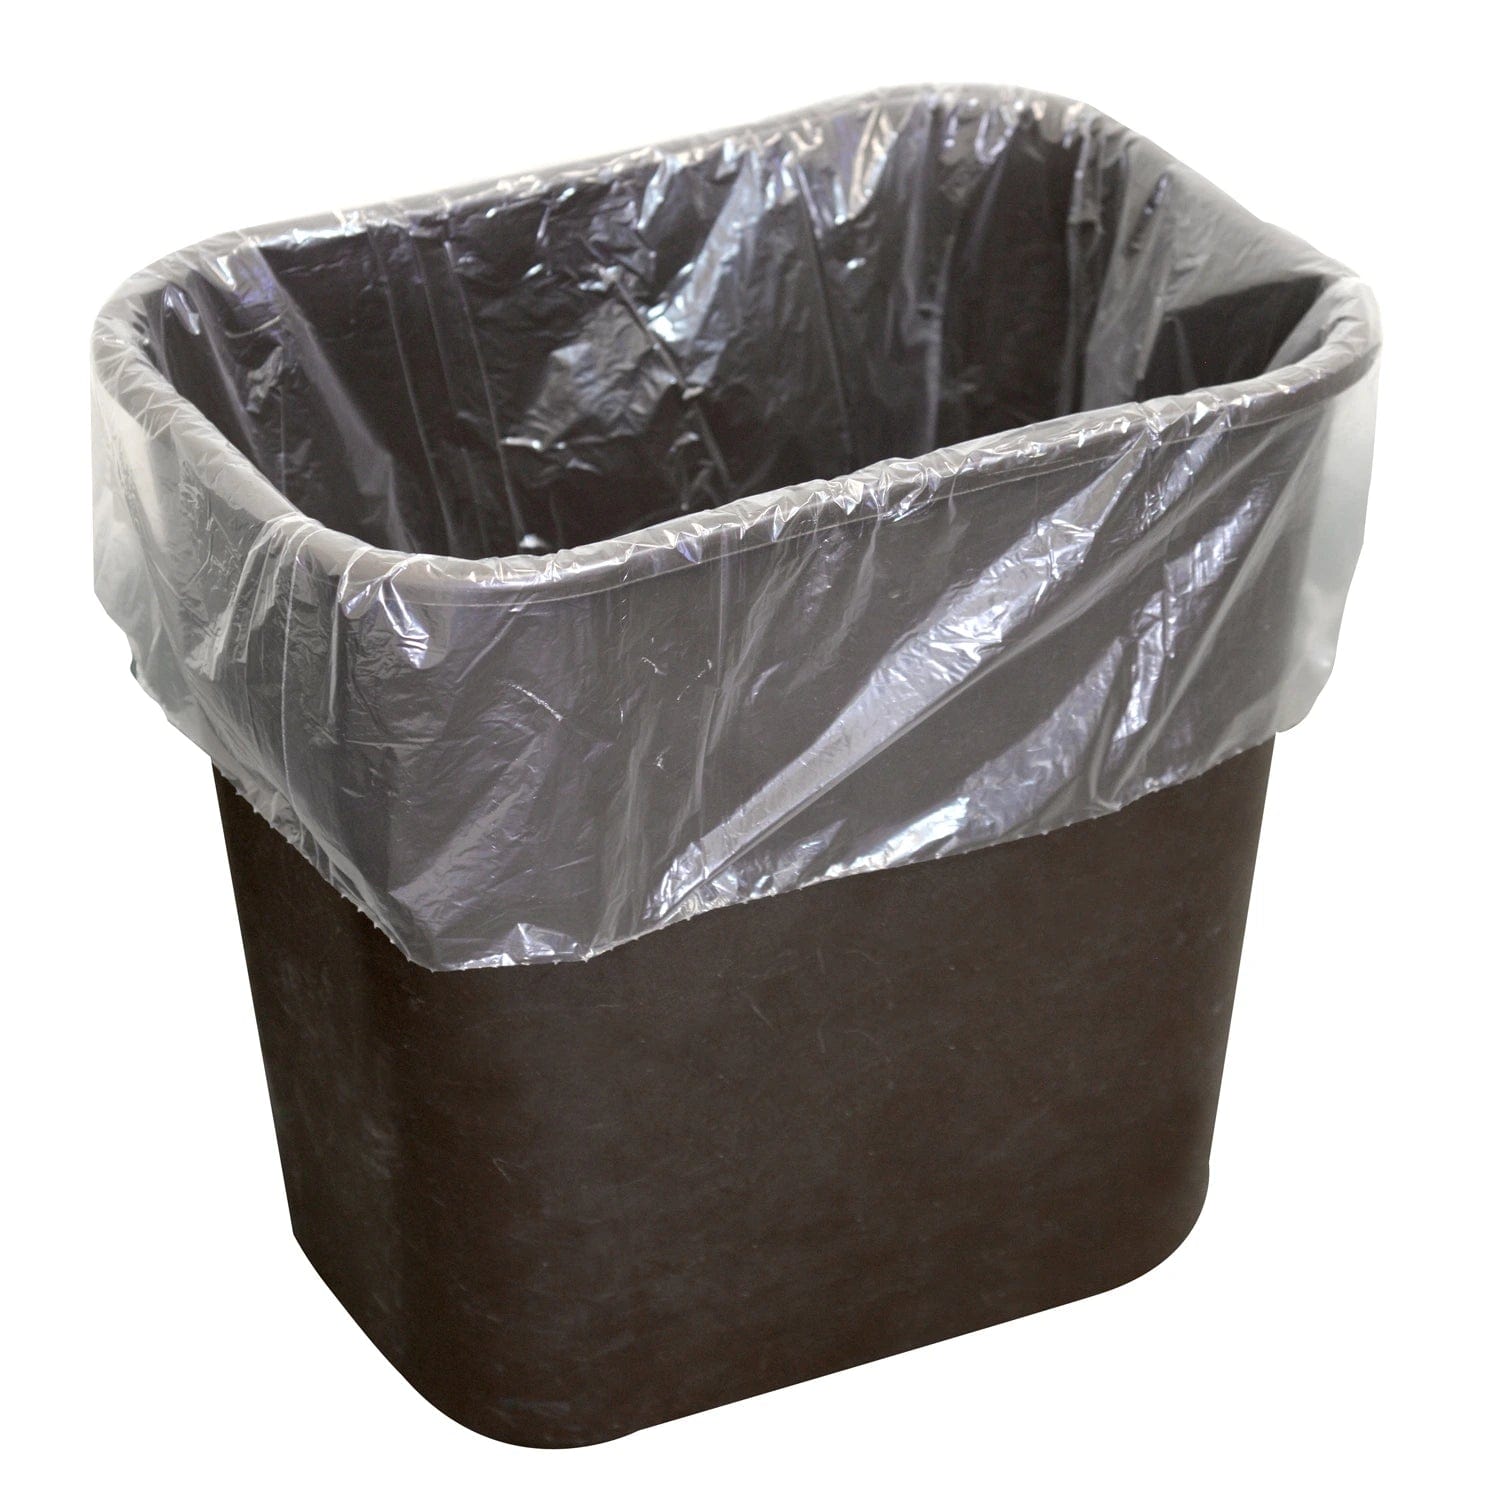 180 Counts Strong Trash Bags - 0.5 Gal Garbage Bags for Small Trash can/Desktop  Mini Trash Can, fit 2 Liter or less Trash Can (Clear) price in Saudi Arabia,  Saudi Arabia